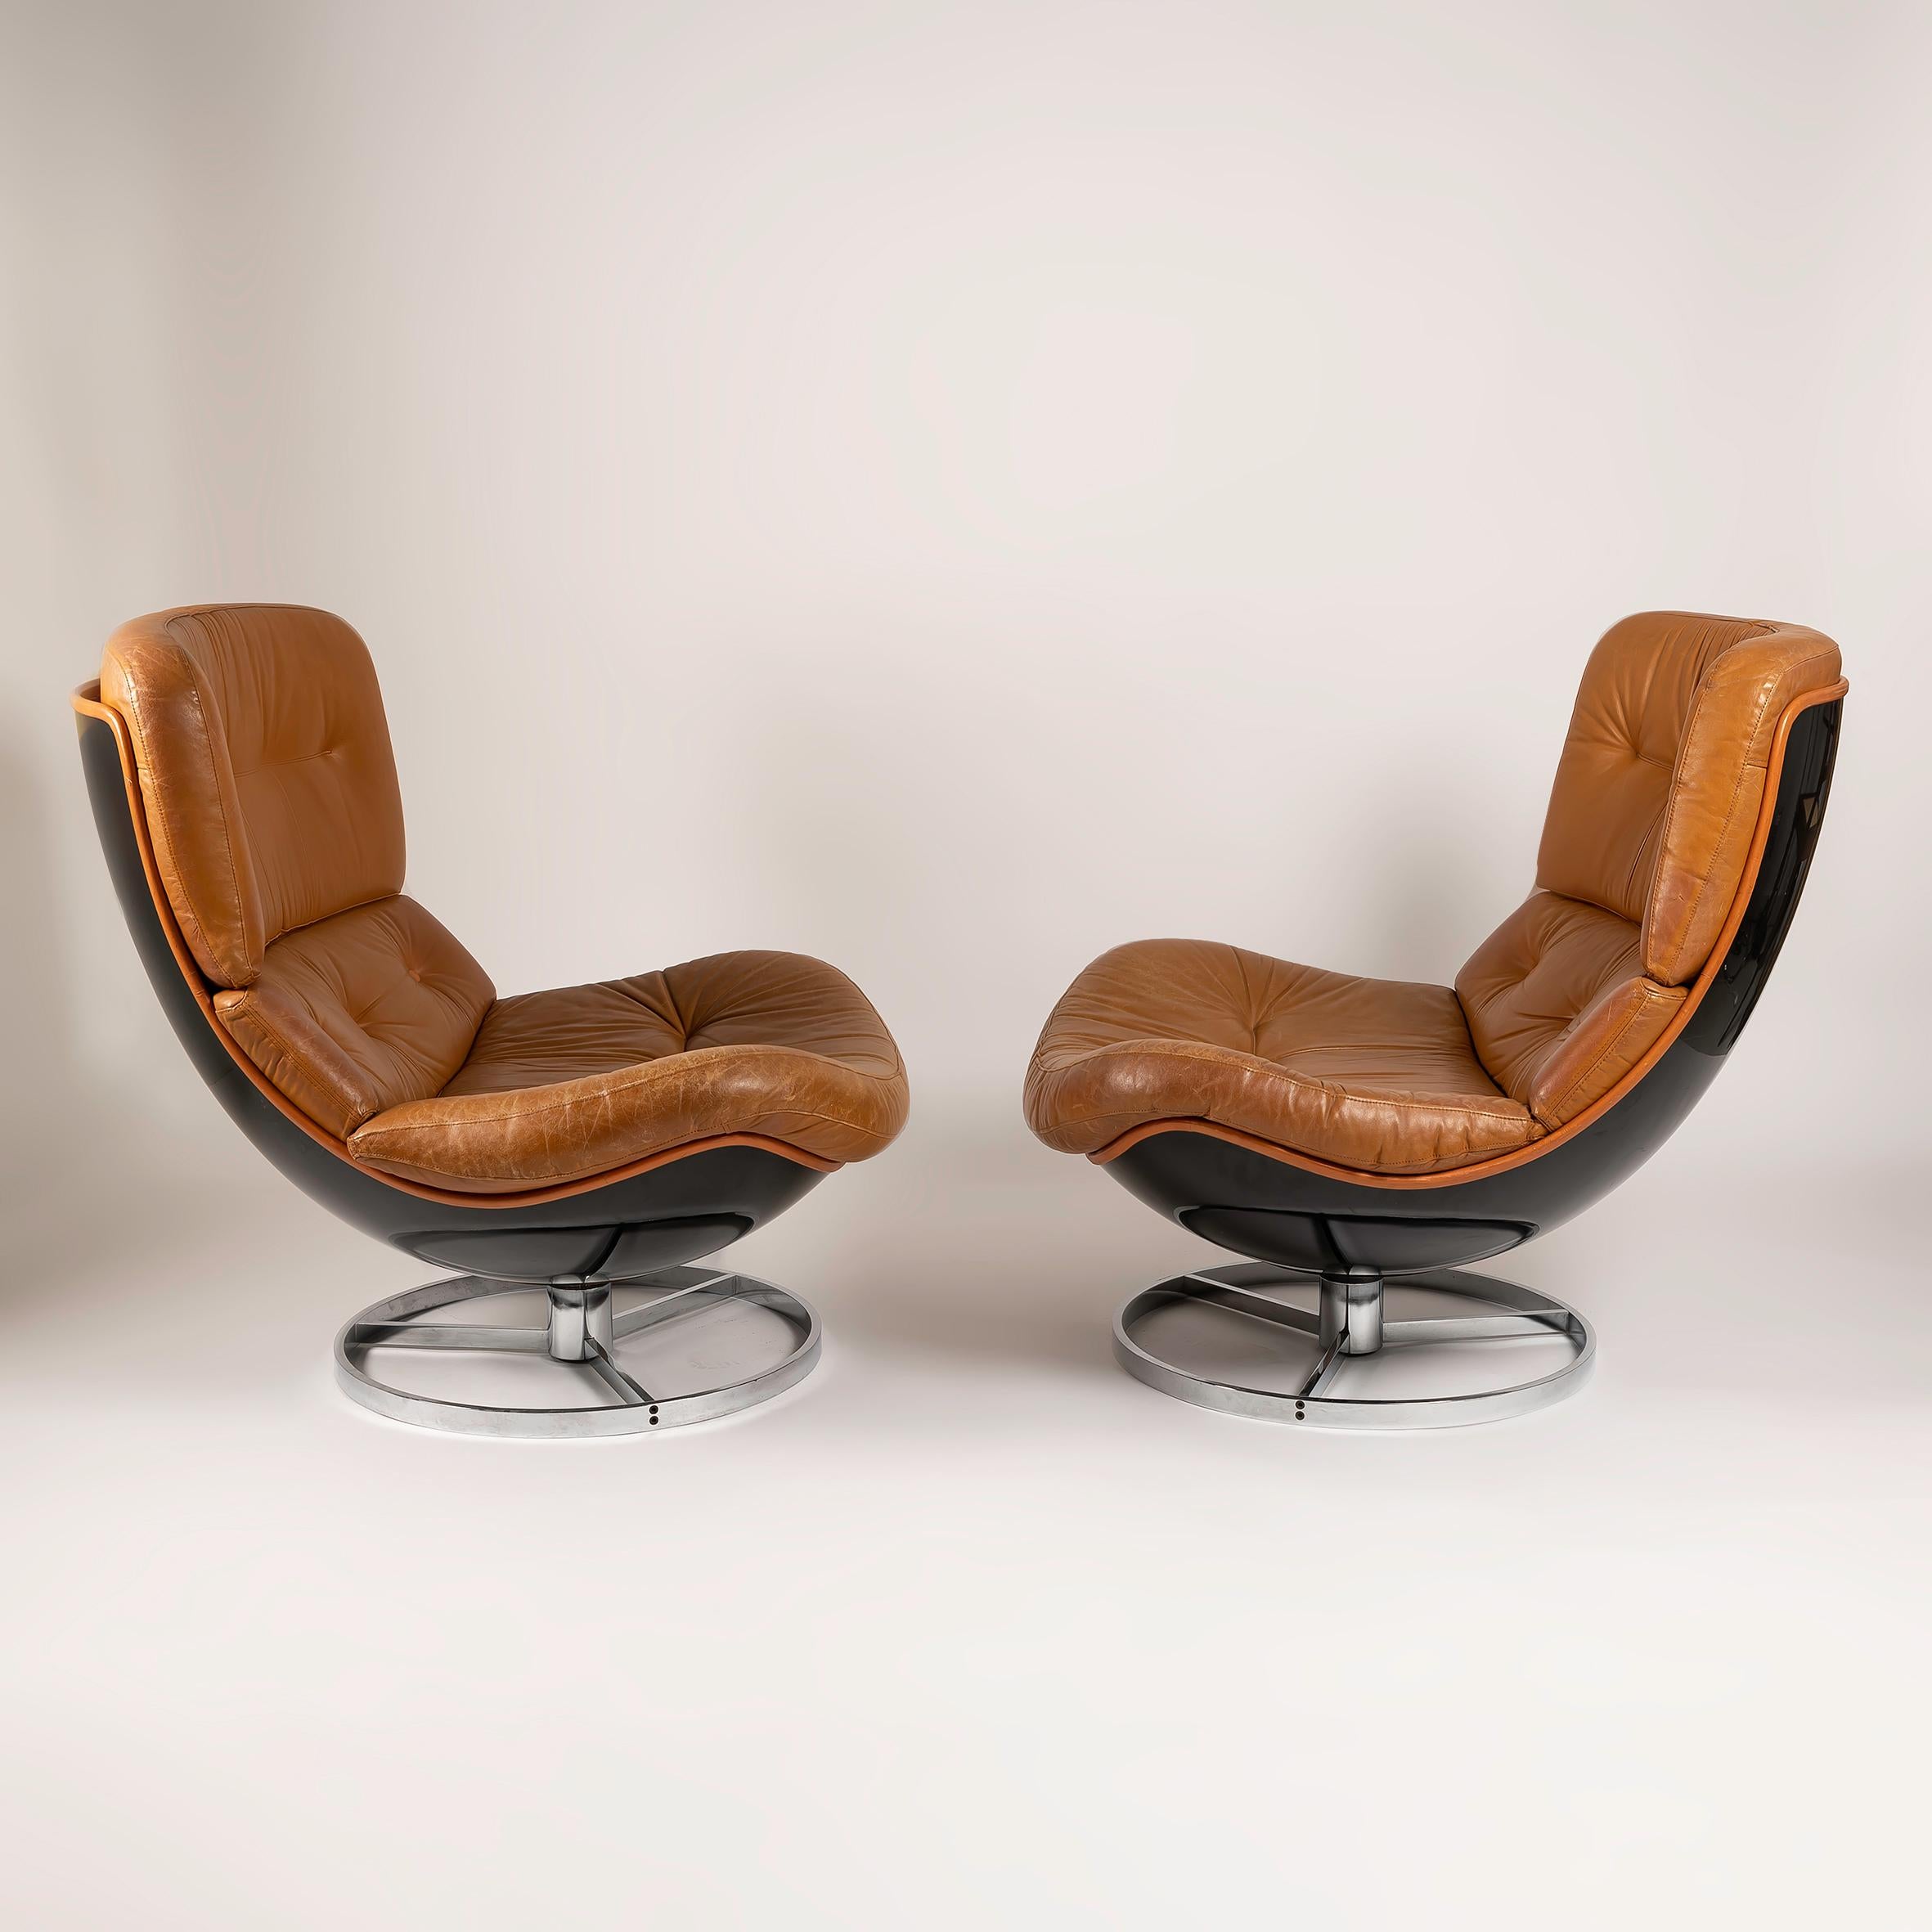 Late 20th Century Set of 2 vintage swivel armchairs by Michel Cadestin, Airborne publisher, 1970s